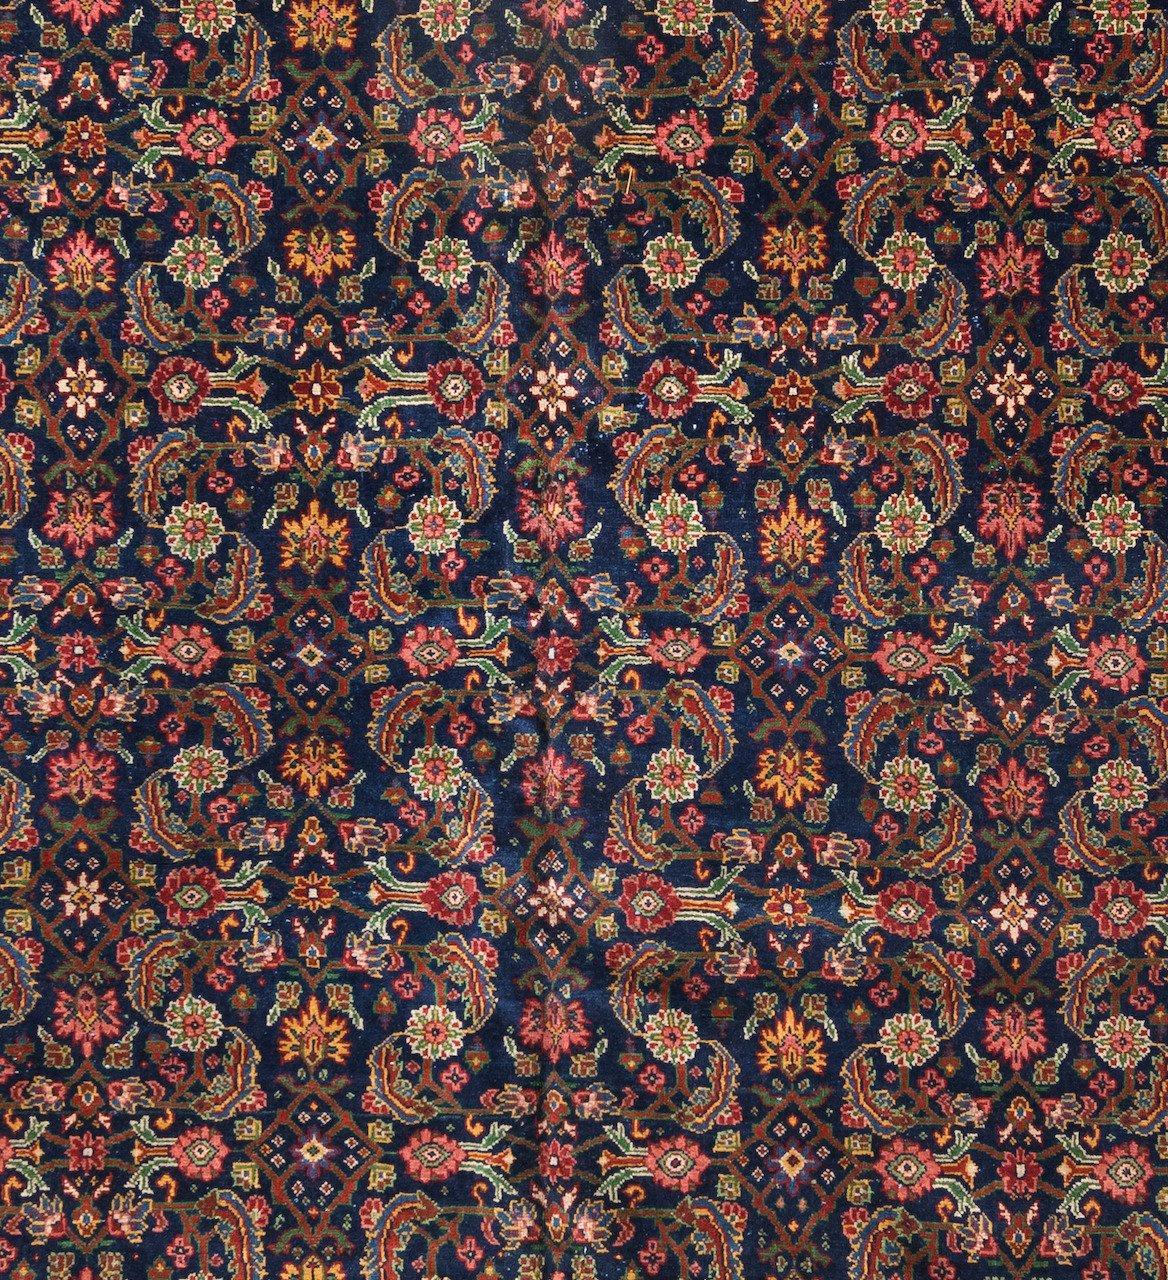 Farahan is a village located in west central Iran, north of the city of Arak, and is known for its finely knotted late 19th century rugs. Most Farahan rugs have a geometric pattern, although some curvilinear rugs are woven in the region as well.